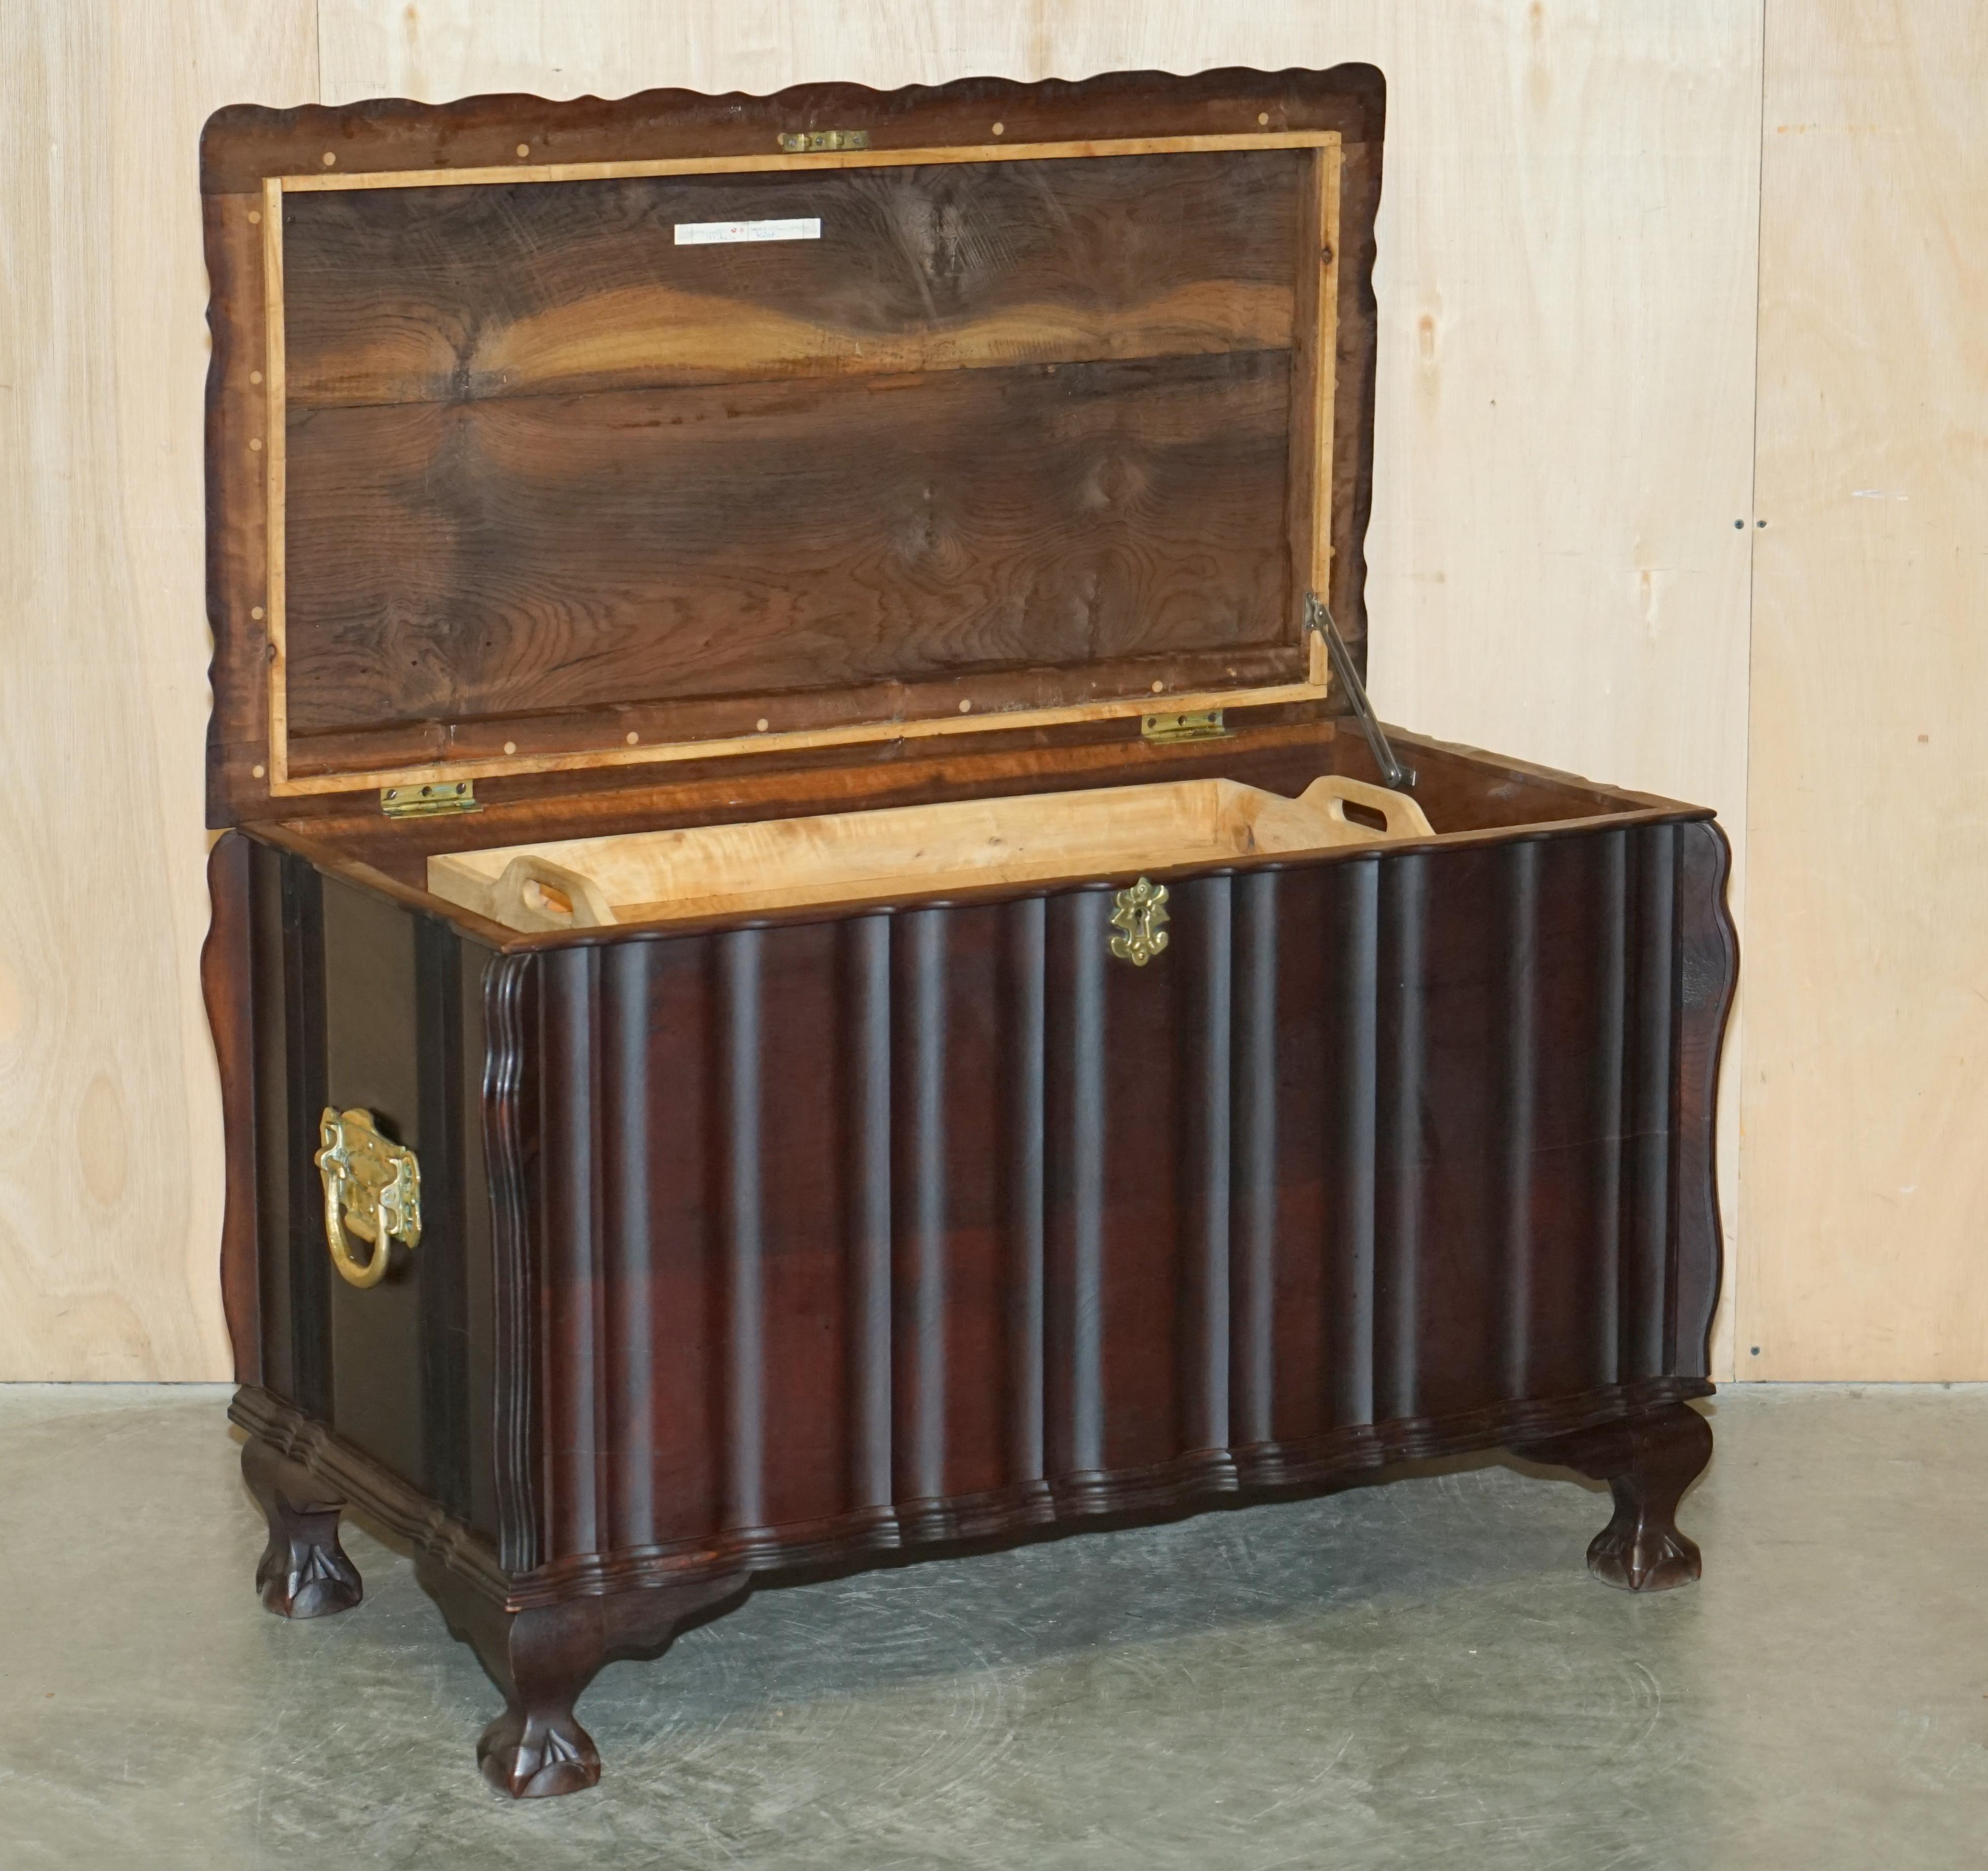 ViNTAGE HAND CARVED HARDWOOD TRUNK OR CHEST WITH ORNATE OVERSIZED BRASS FITTINGS For Sale 6